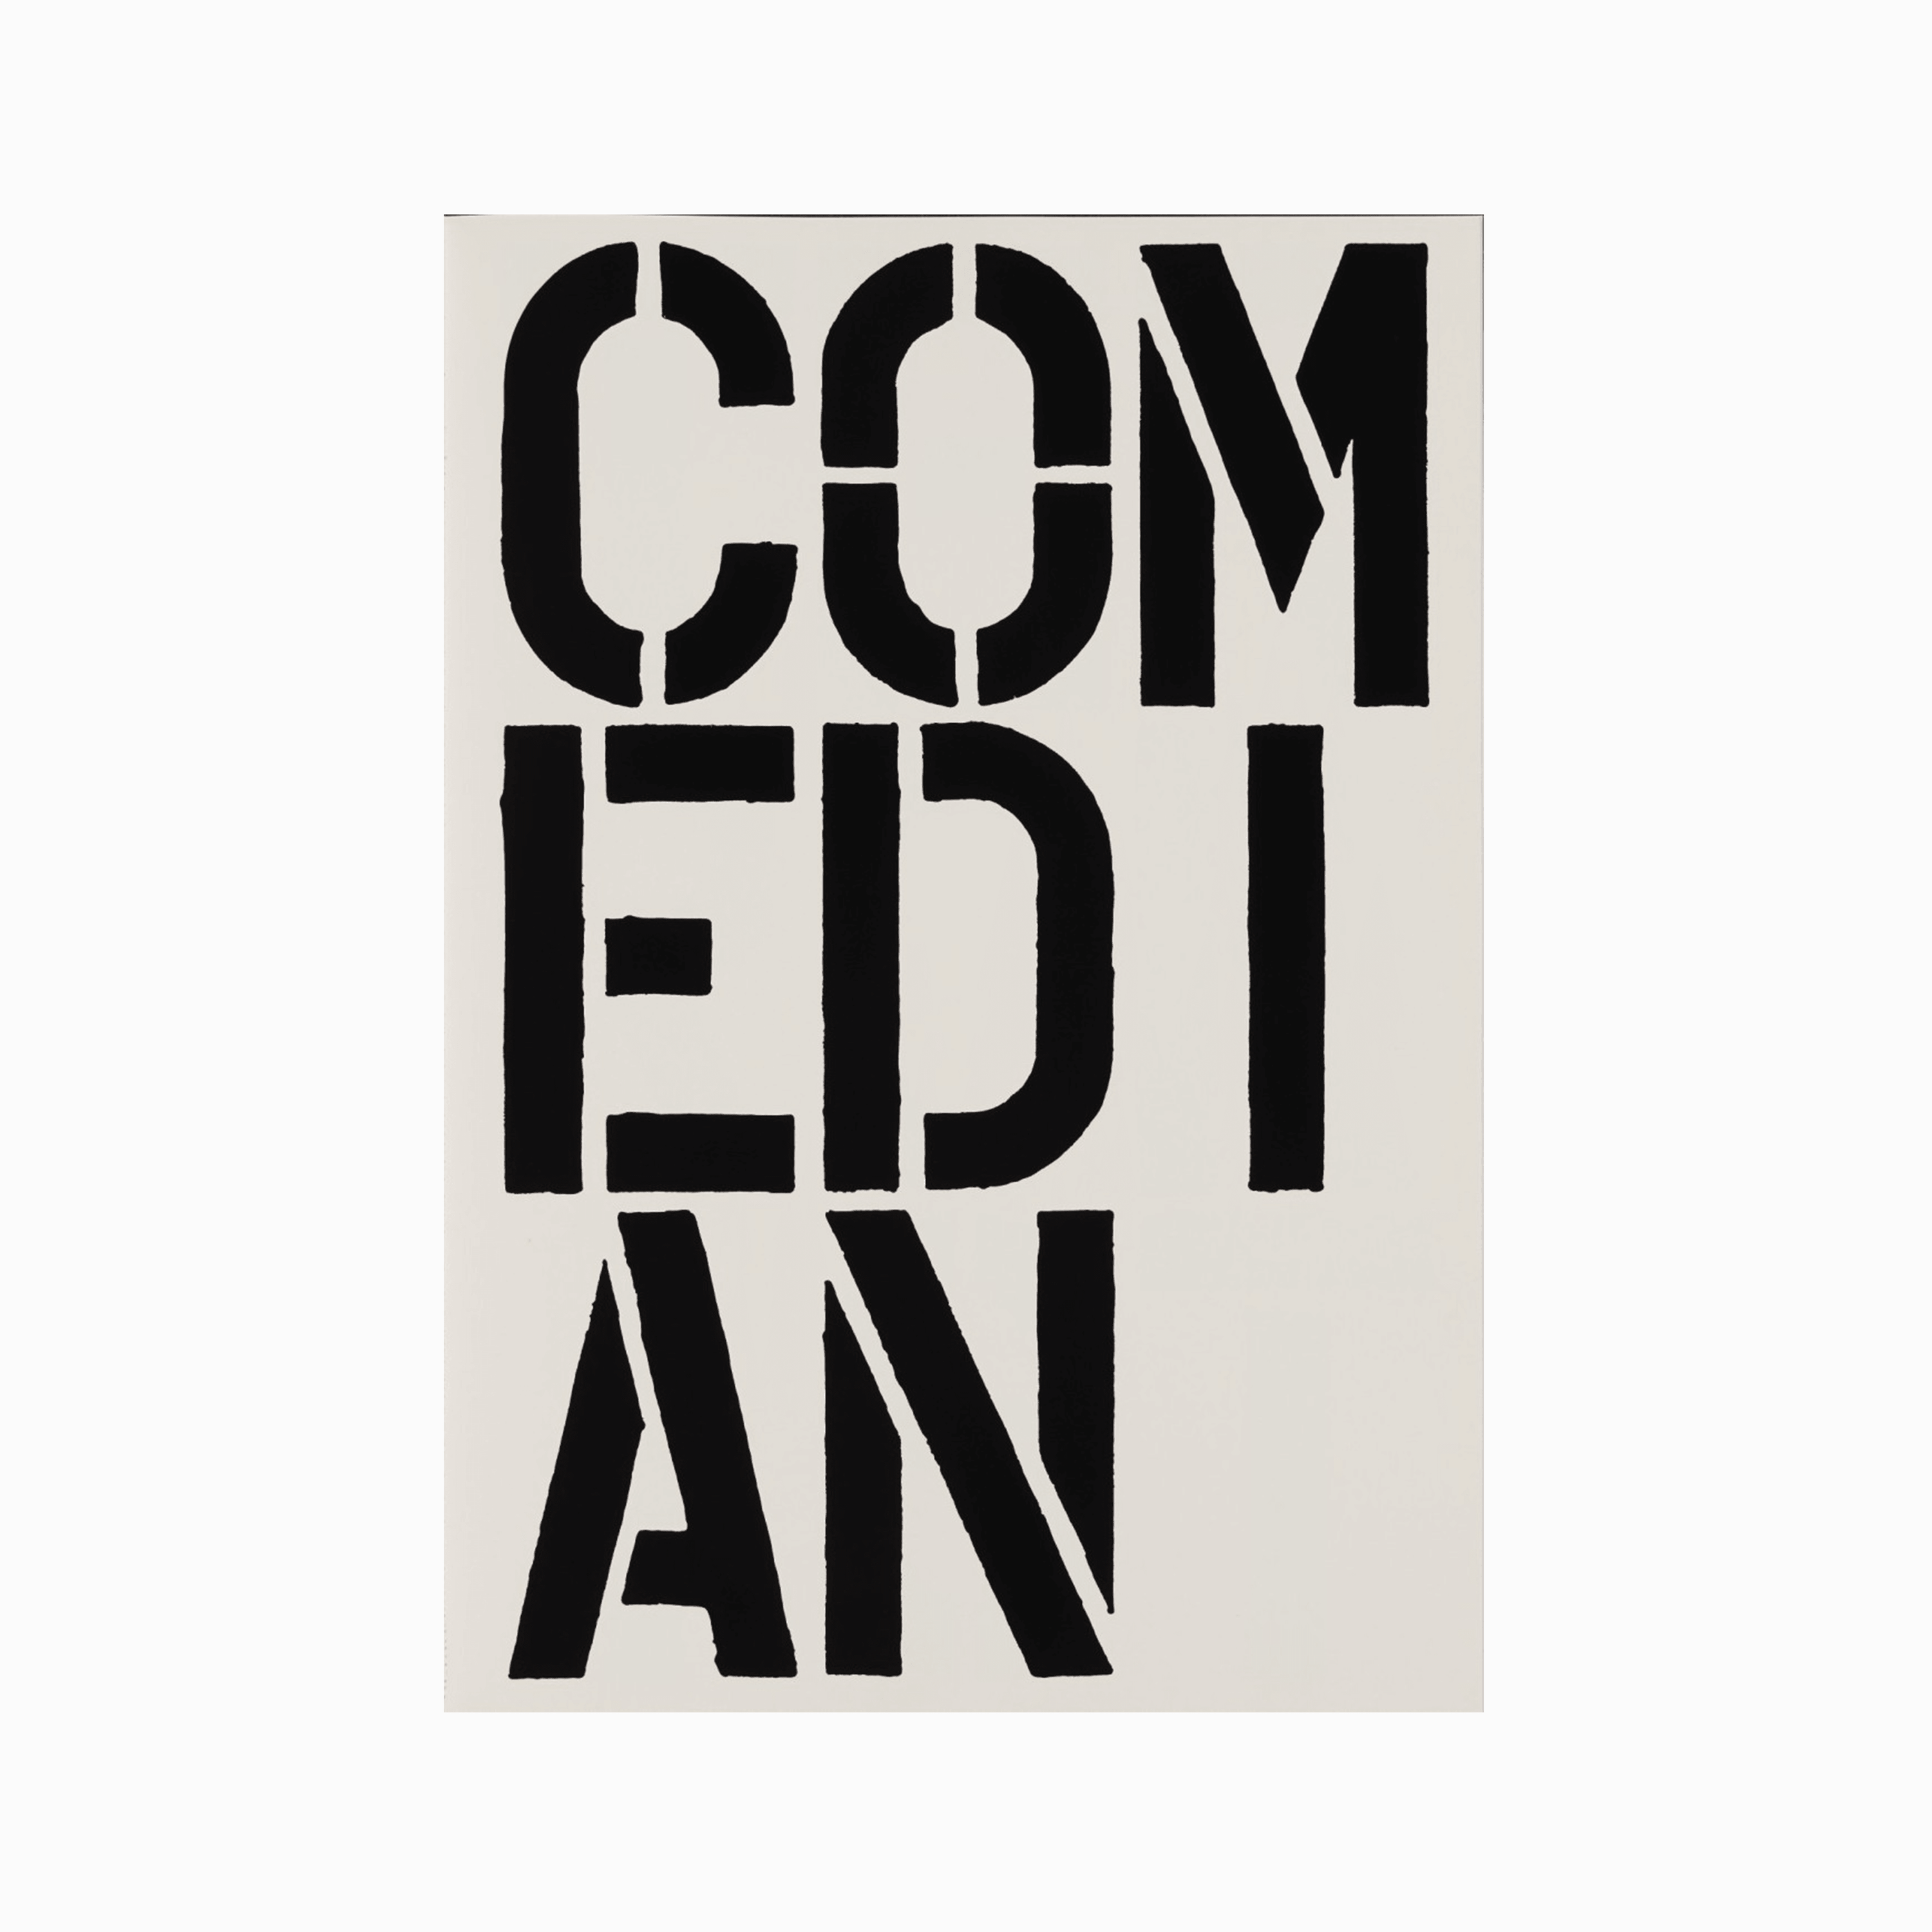 Comedian (page from Black Book) - CommodityGallery